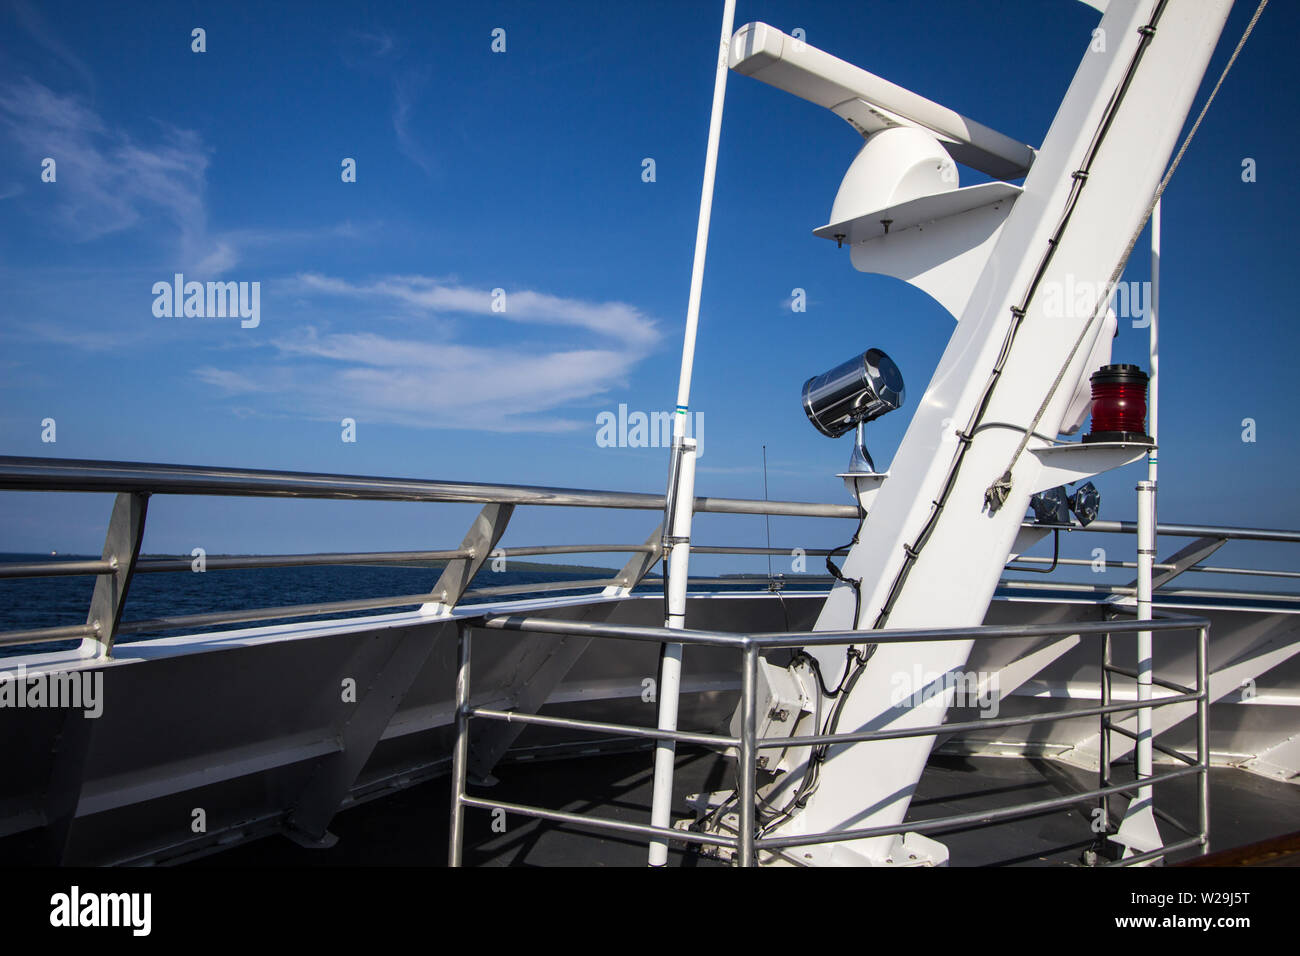 Boating Background. Deck of a large boat on a sunny summer day with blue sky and blue sea horizon Stock Photo